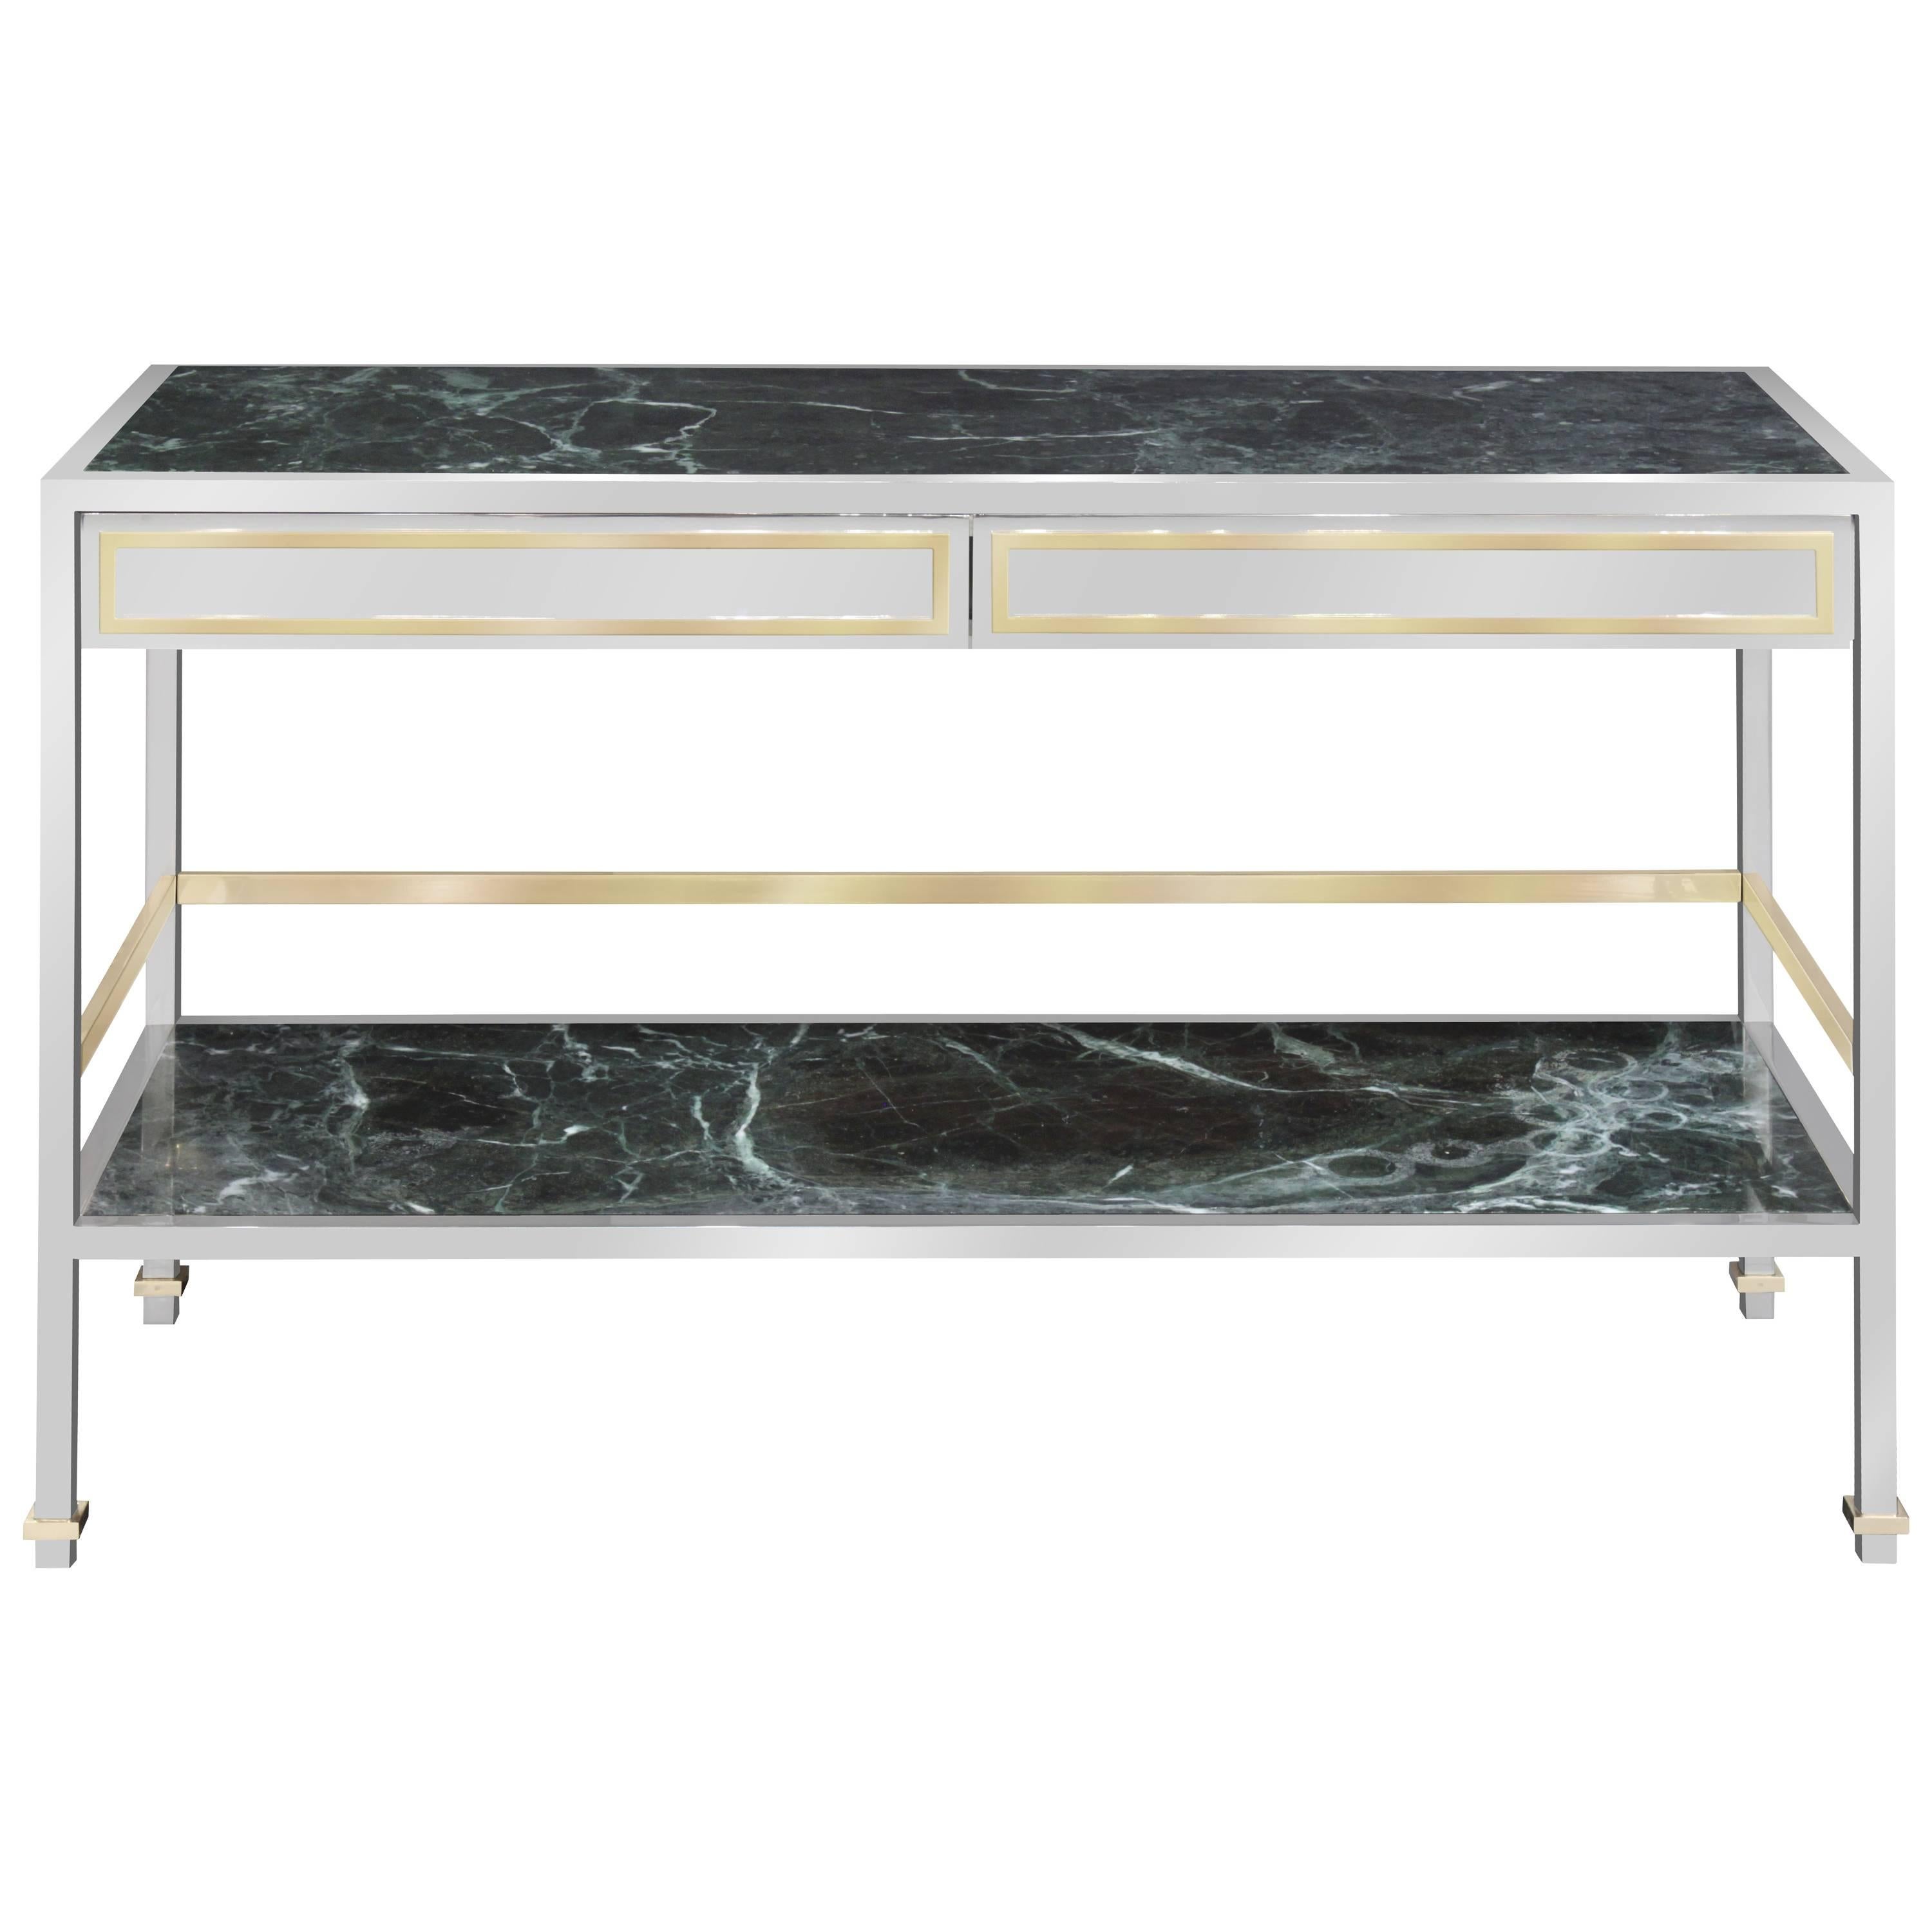 Console Table/Dry Bar in Polished Steel with Inset Marble by Paul M. Jones